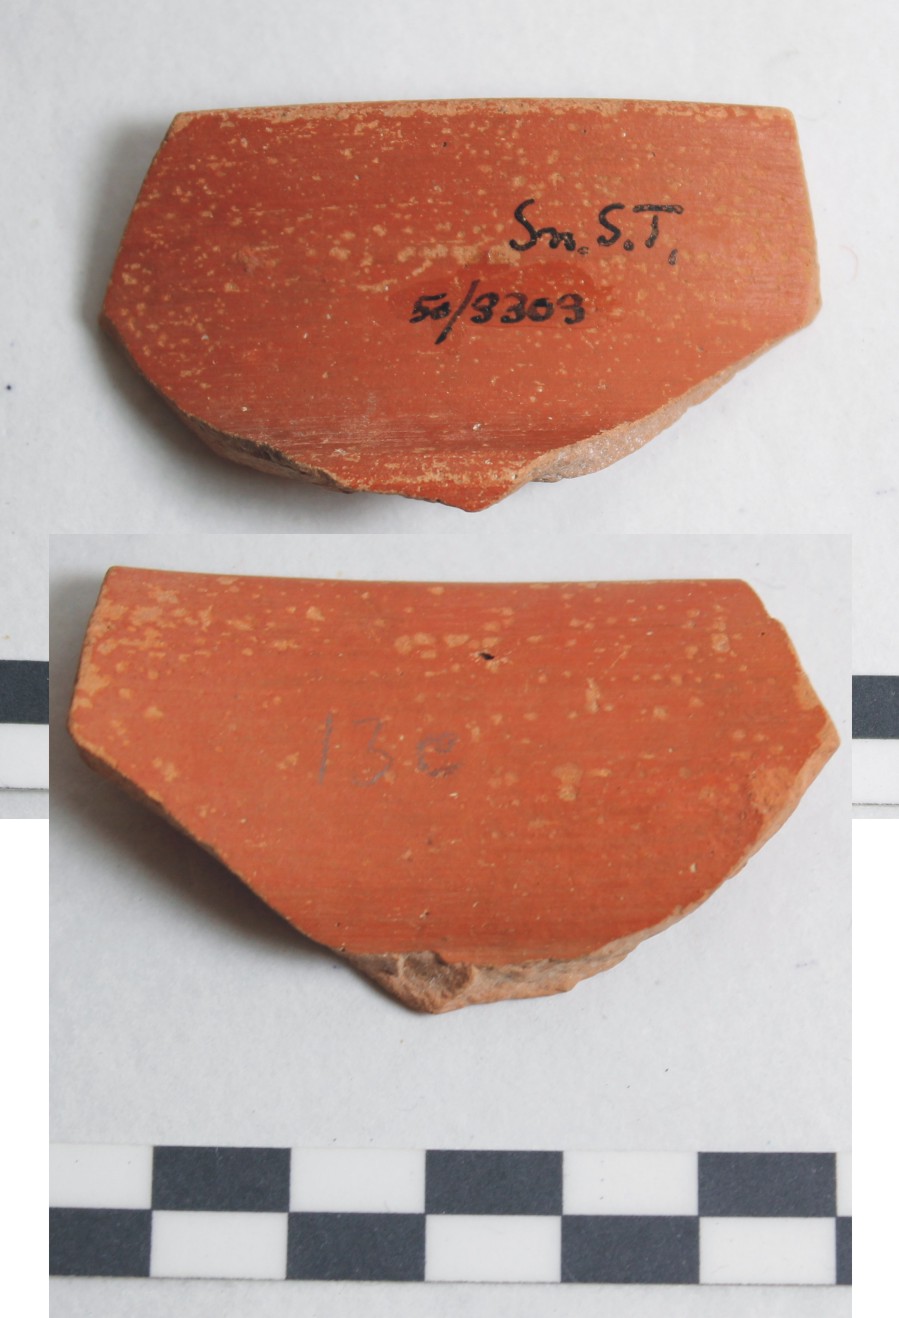 Image for: Sherd of a pottery vessel